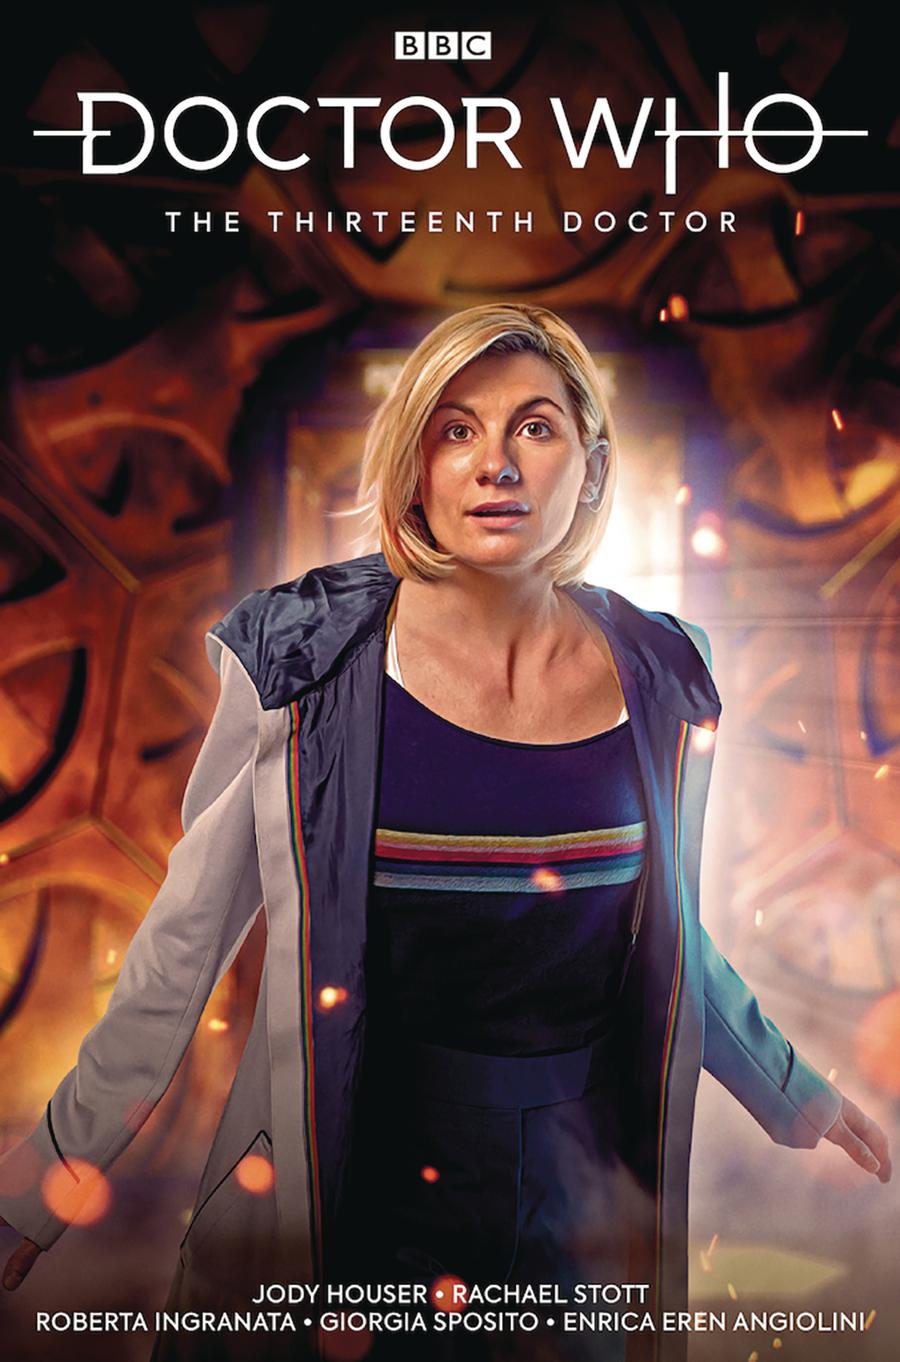 Doctor Who 13th Doctor Vol 2 TP